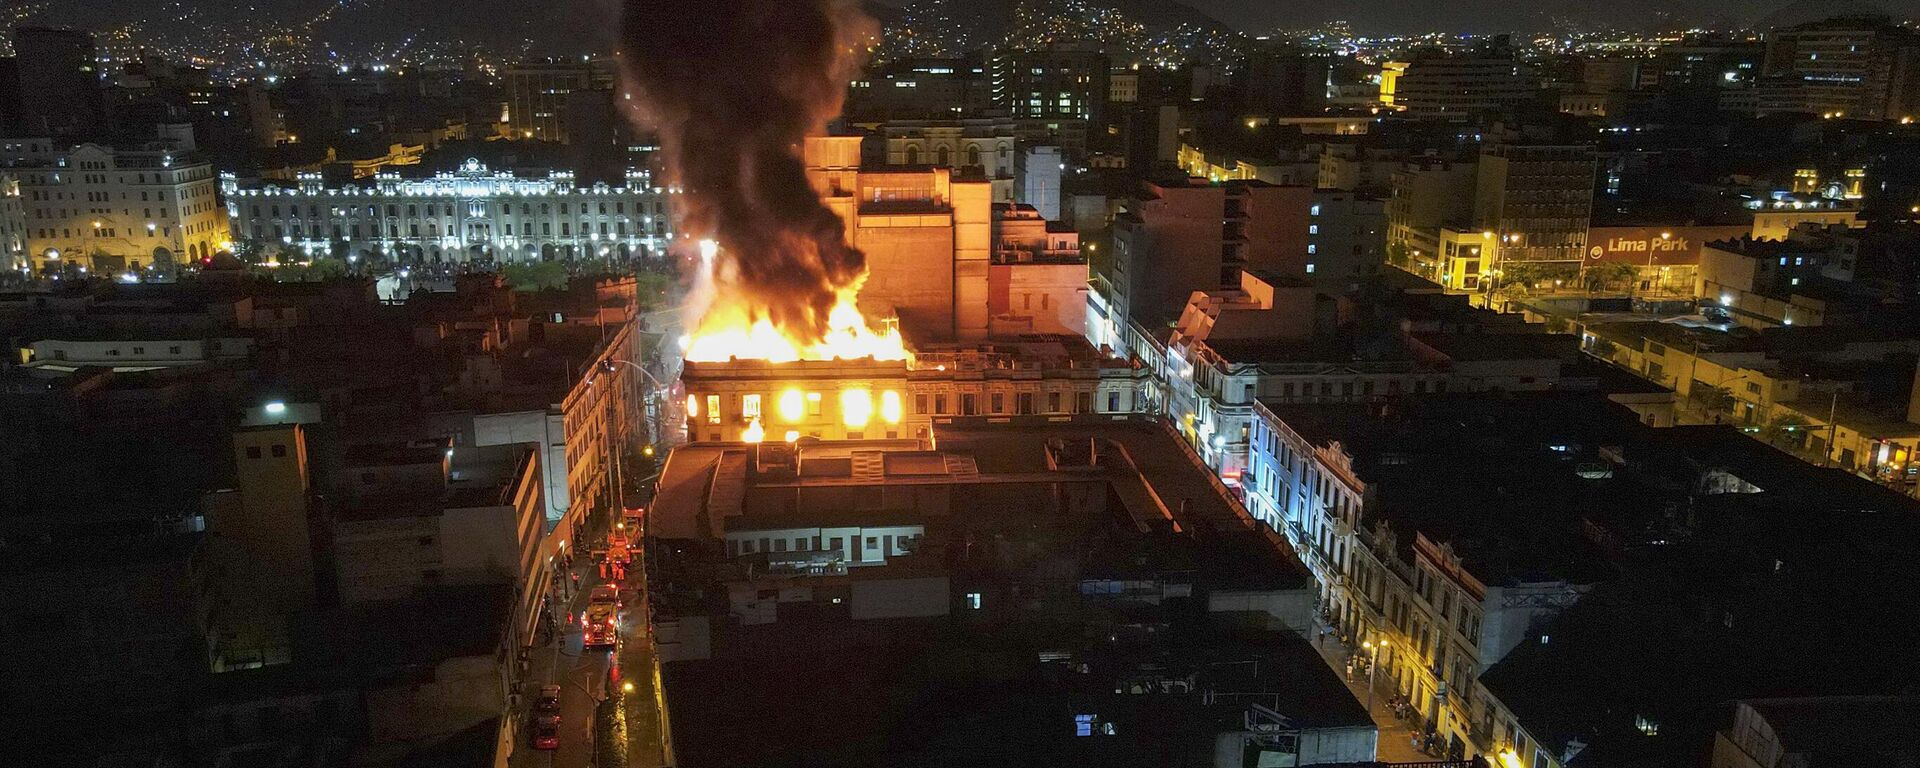 A building burns amid anti-government protests in downtown Lima, Peru, Thursday, January 19, 2023.  - Sputnik International, 1920, 20.01.2023